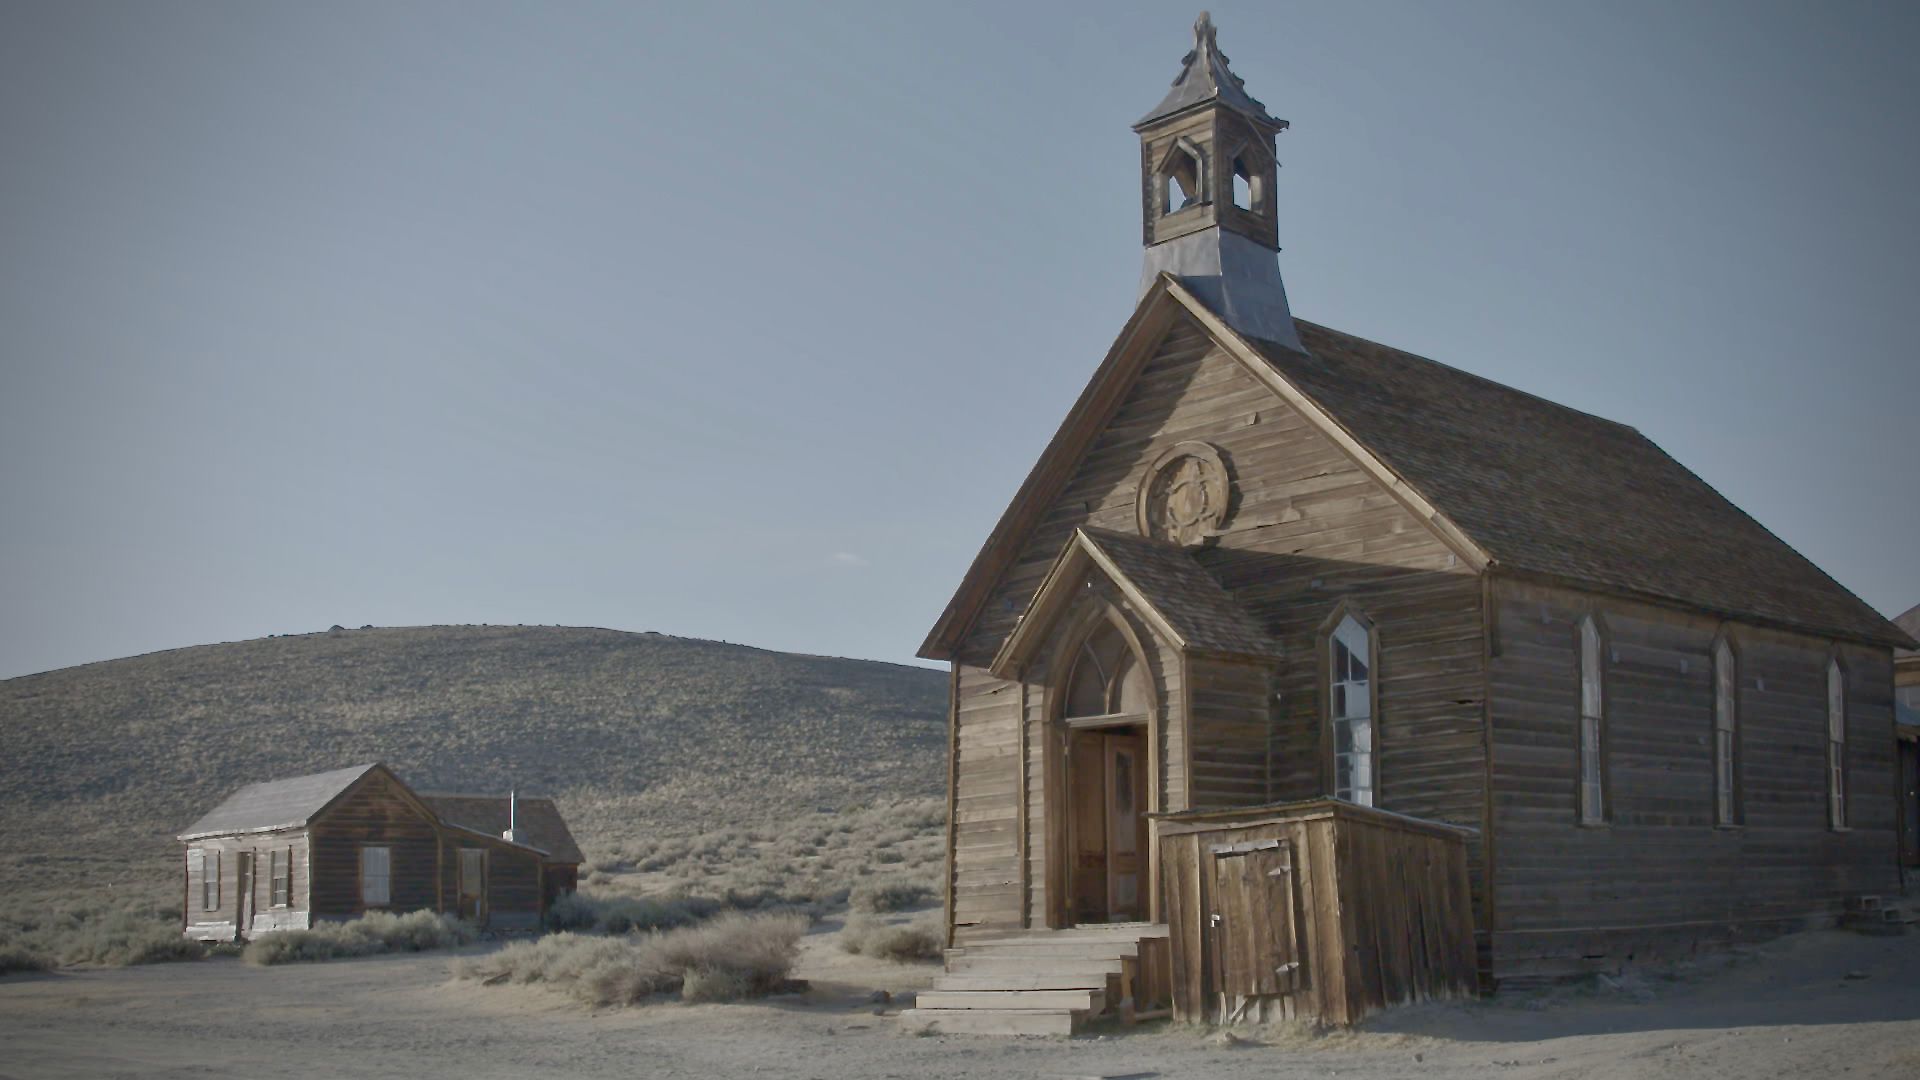 Bodie's Methodist Church. This is from Drain the Oceans [Photo of the day - October 2021]